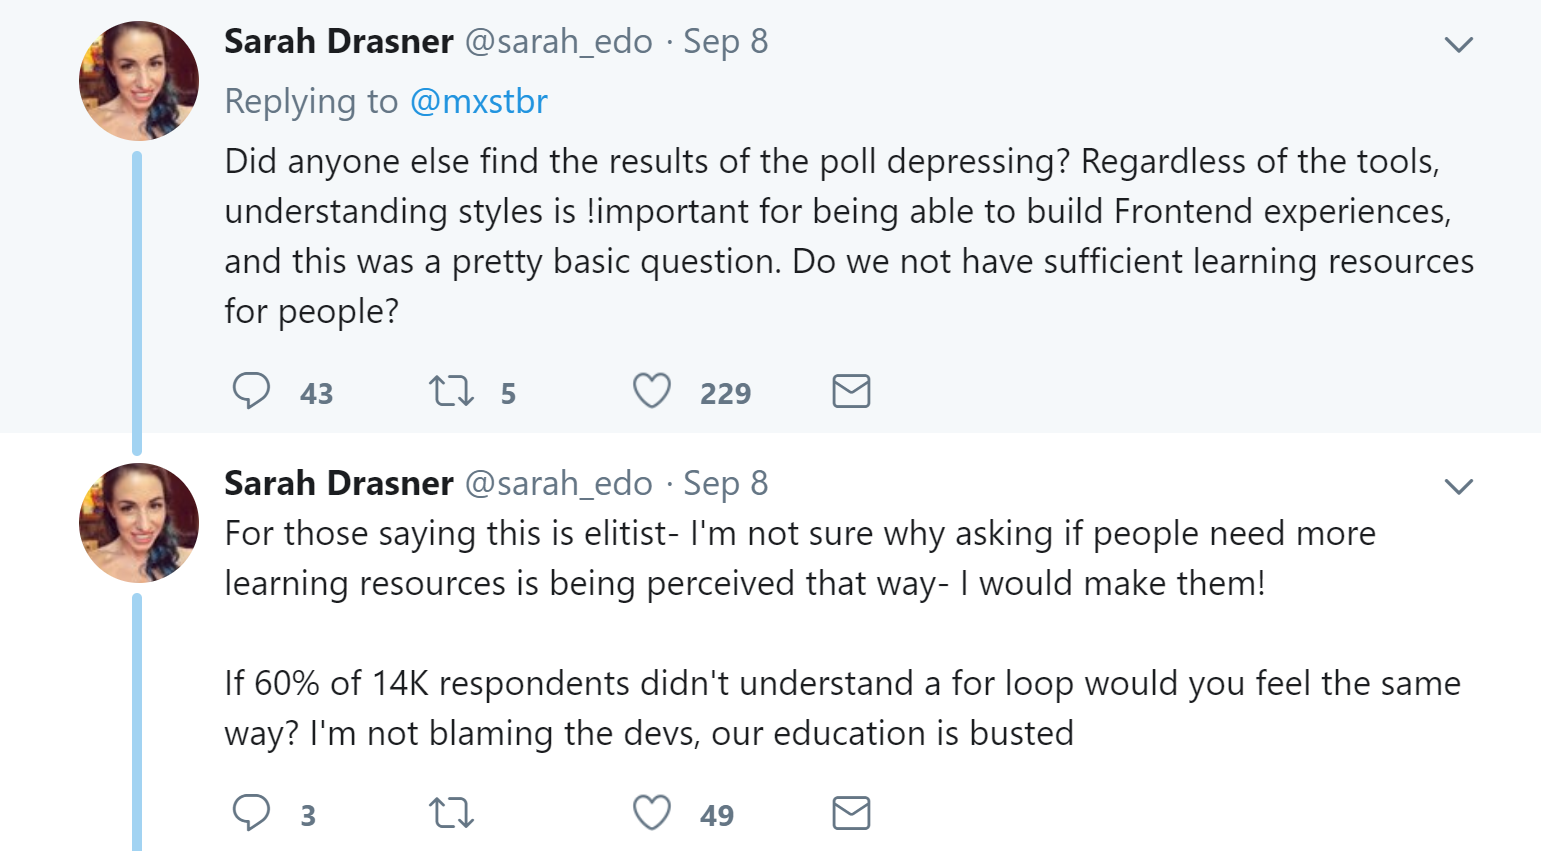 Image of tweet by Sarah Drassner suggesting a better approach is needed for education, offering to help make the resources required.